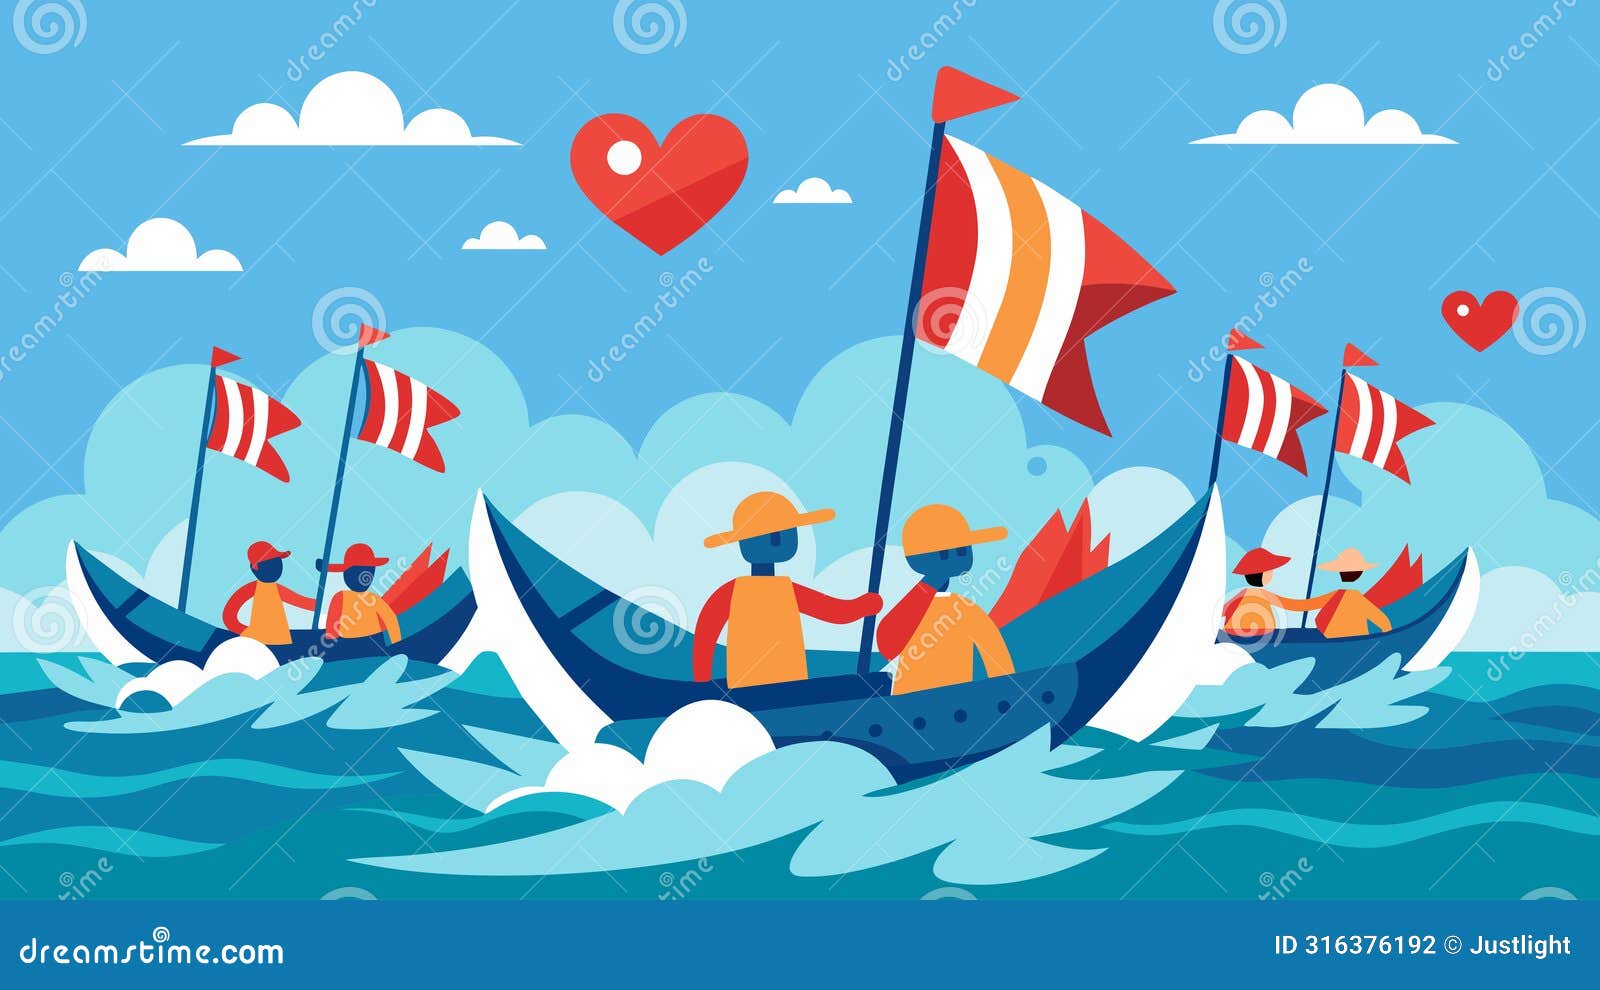 the sight of the regatta fills the heart with pride and joy as the boats carry the spirit of patriotism on their sails